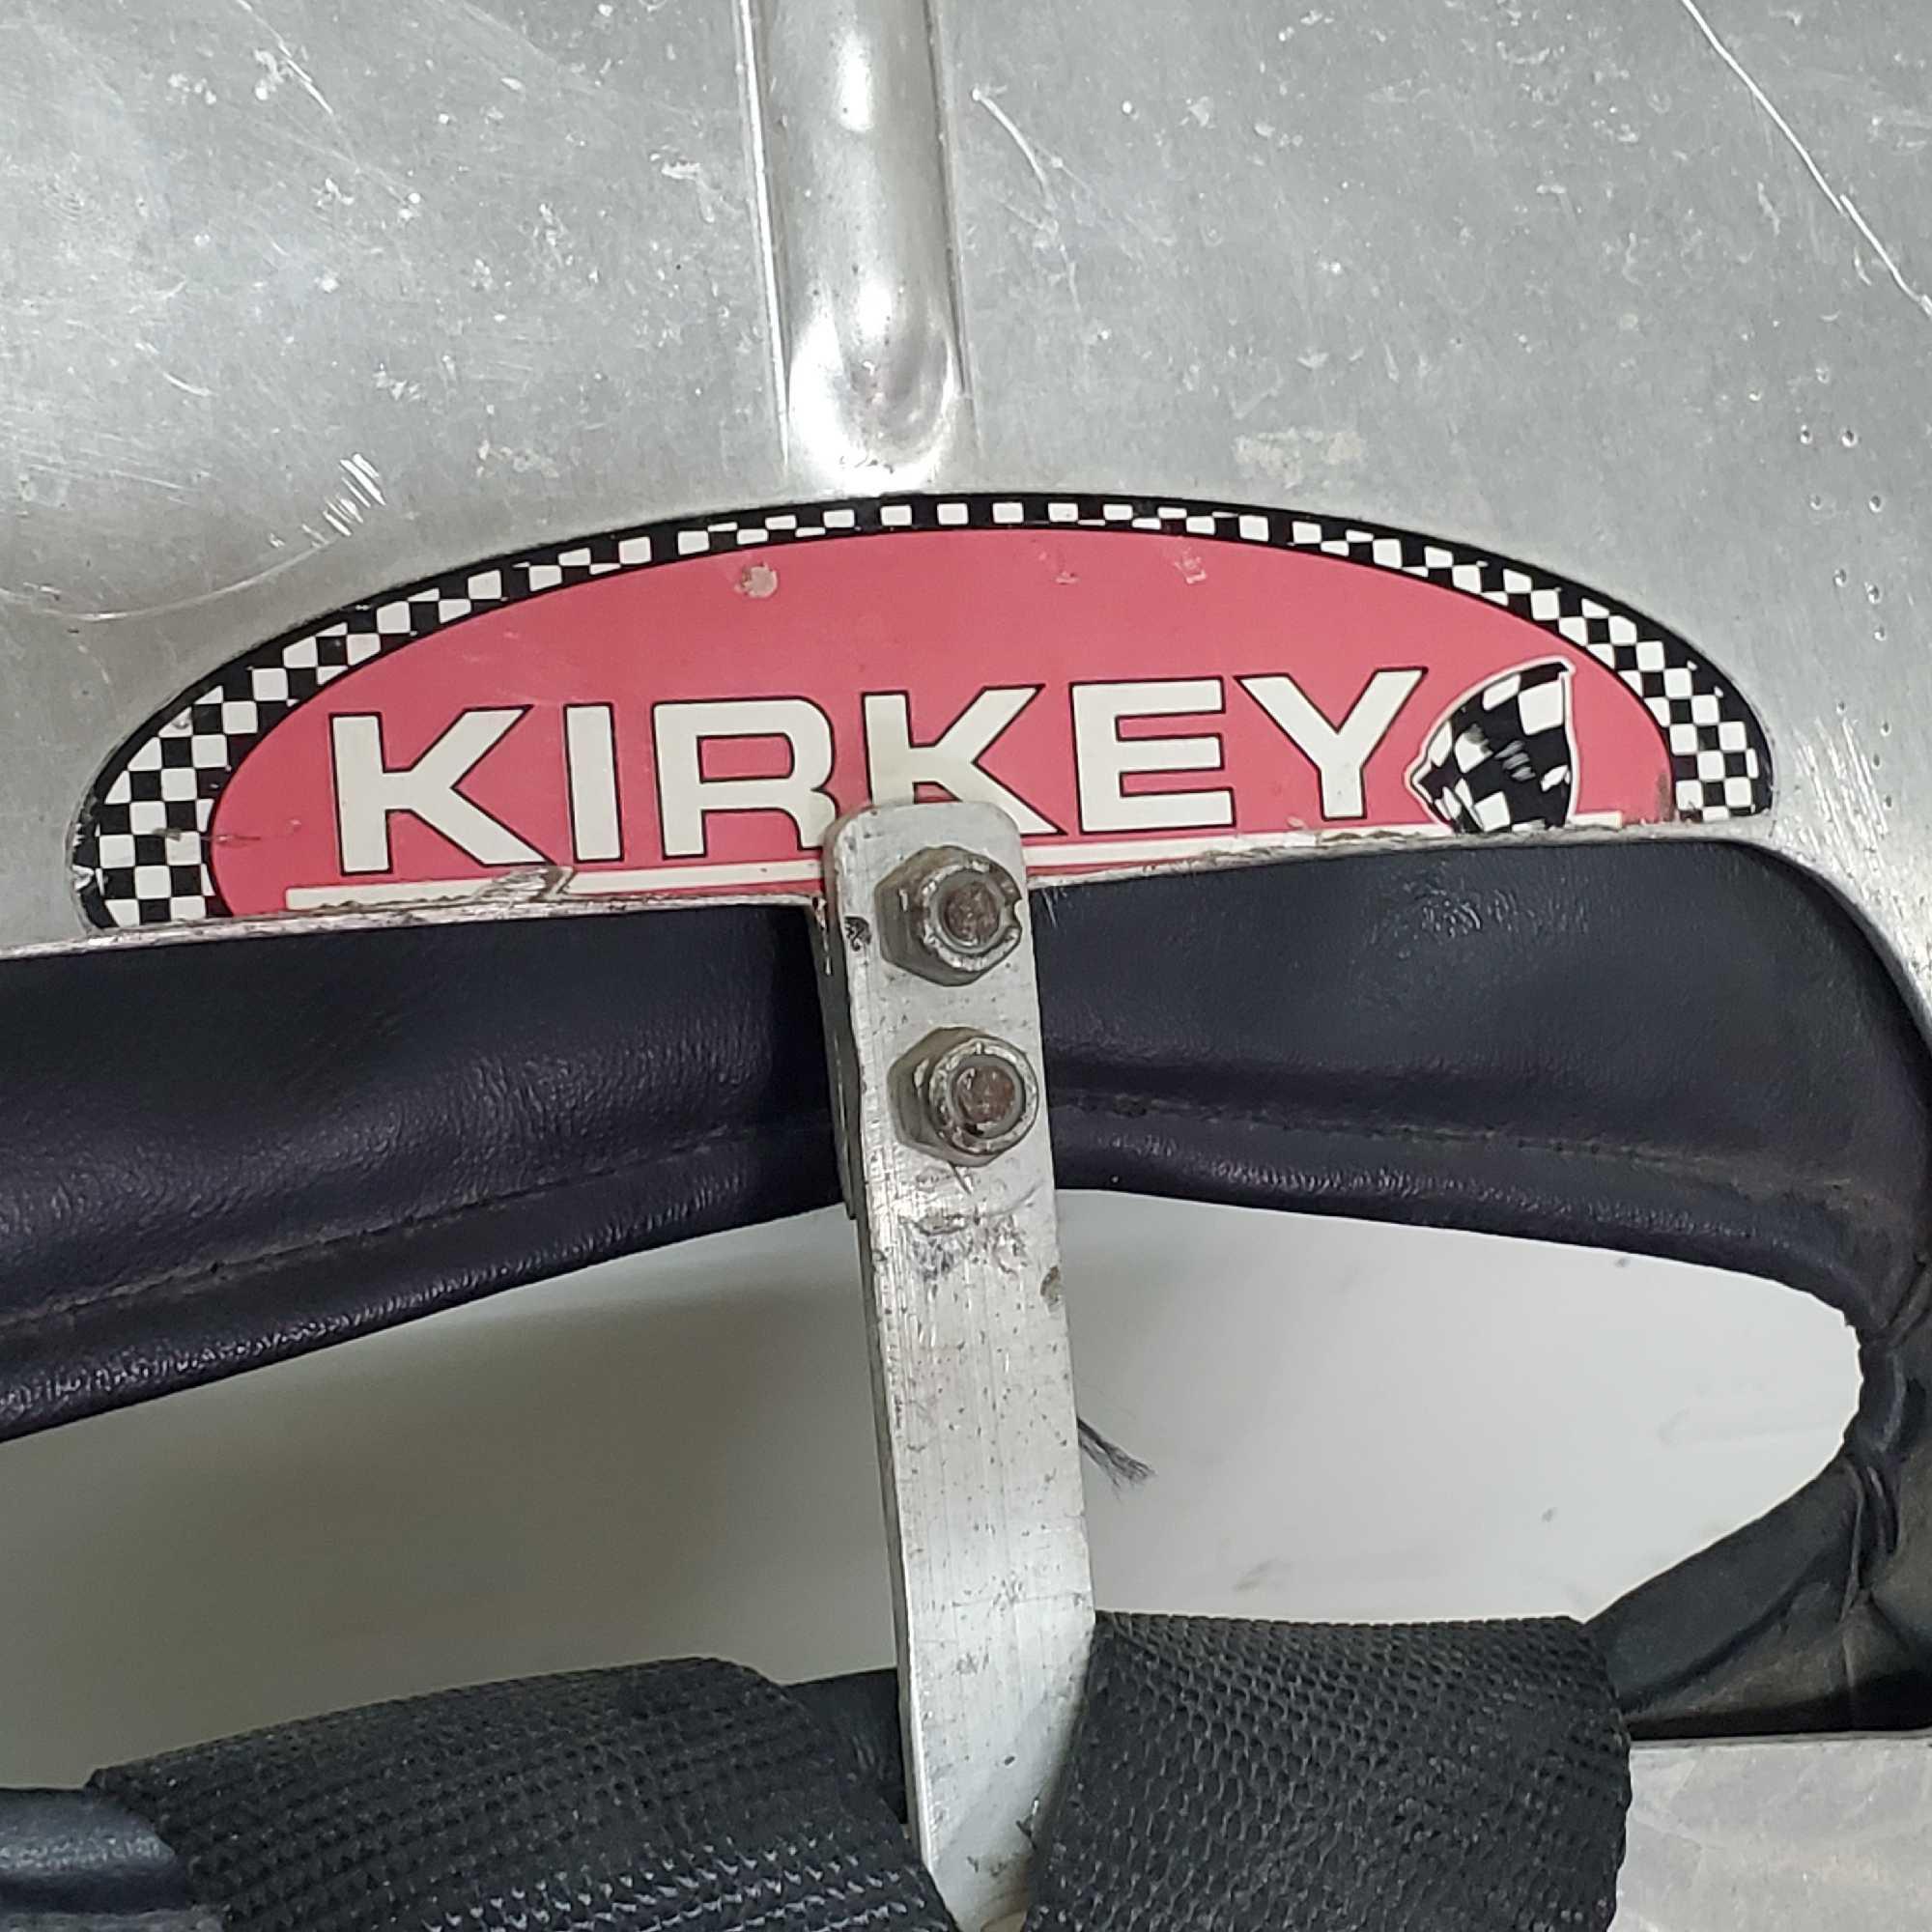 Kirkey Bucket racing seat with Sabelt 5 point harness box of extra Sabel 5 point harness